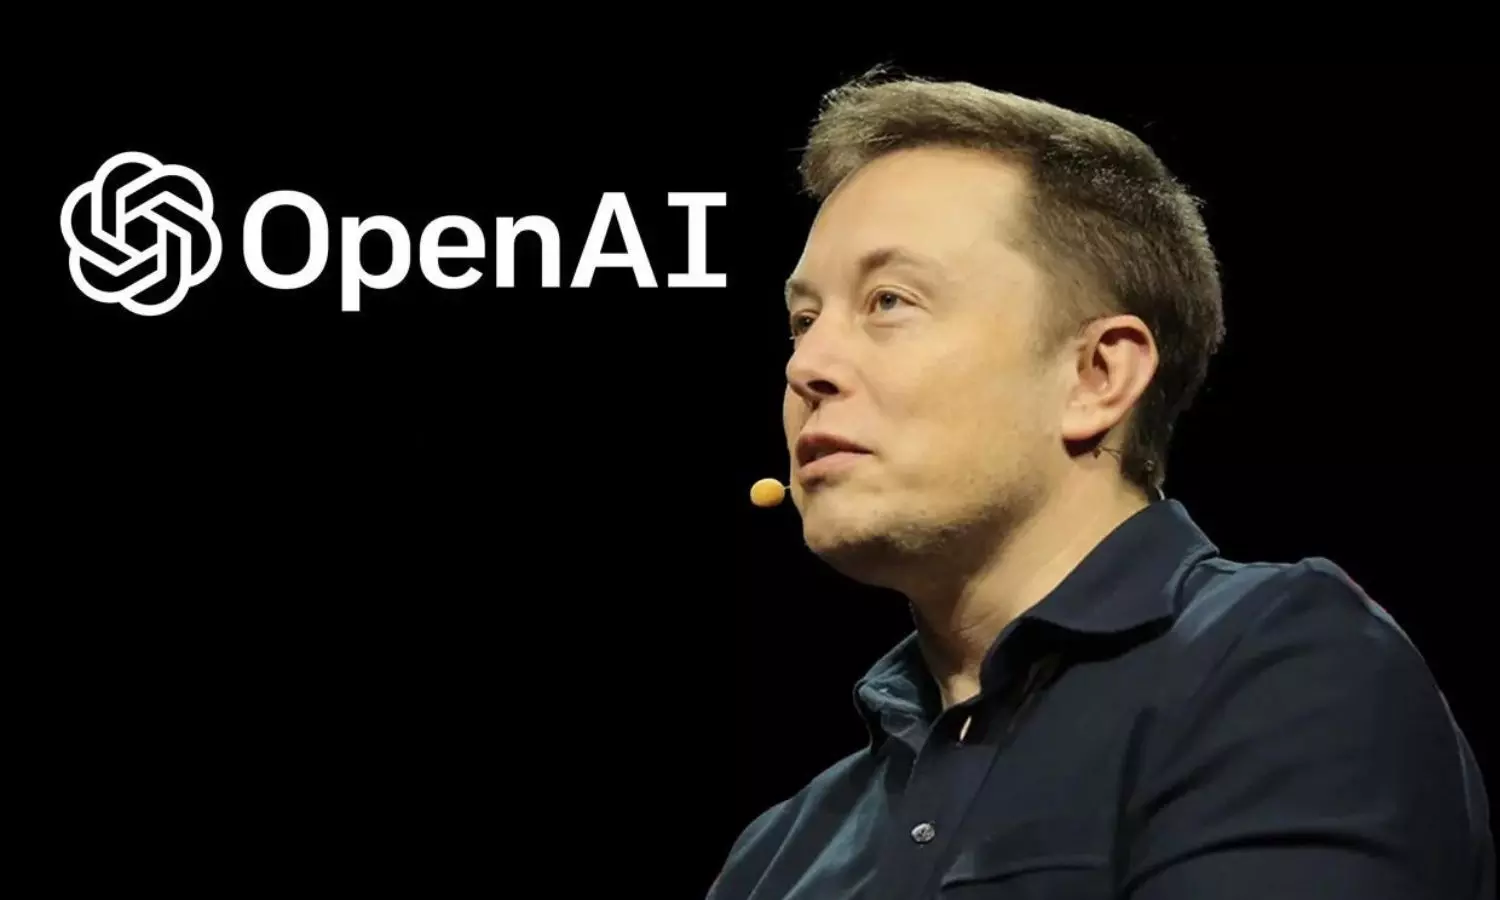 Elon Musks bold stand: No Apple devices allowed if OpenAI integration occurs